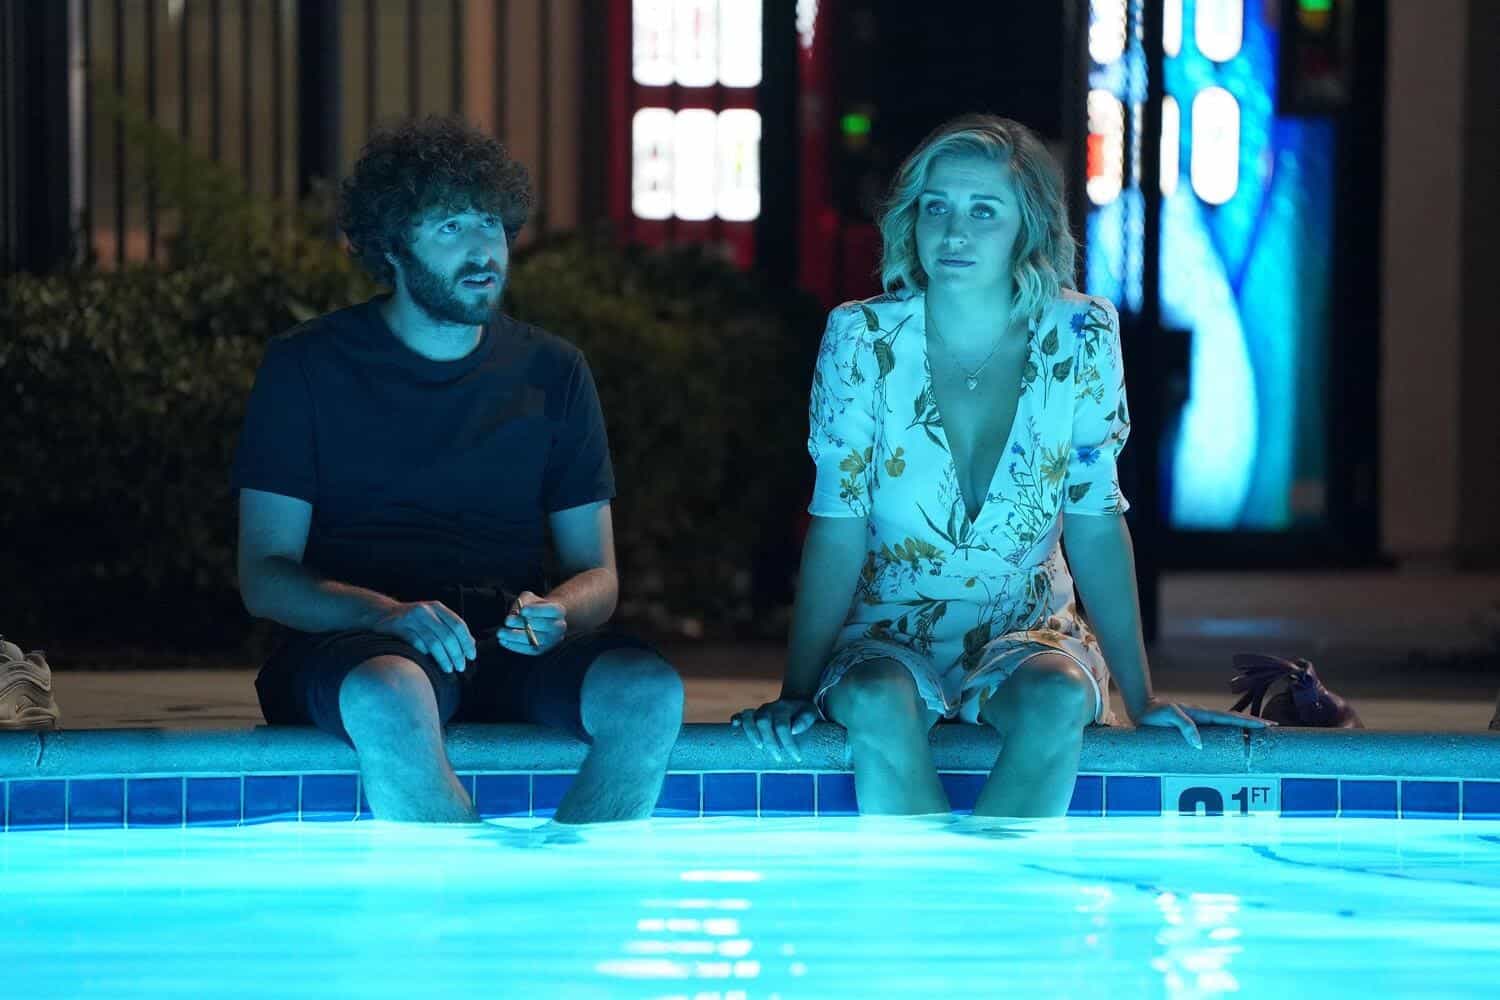 A man and woman sit with their feet in a pool in this image from FX Productions.